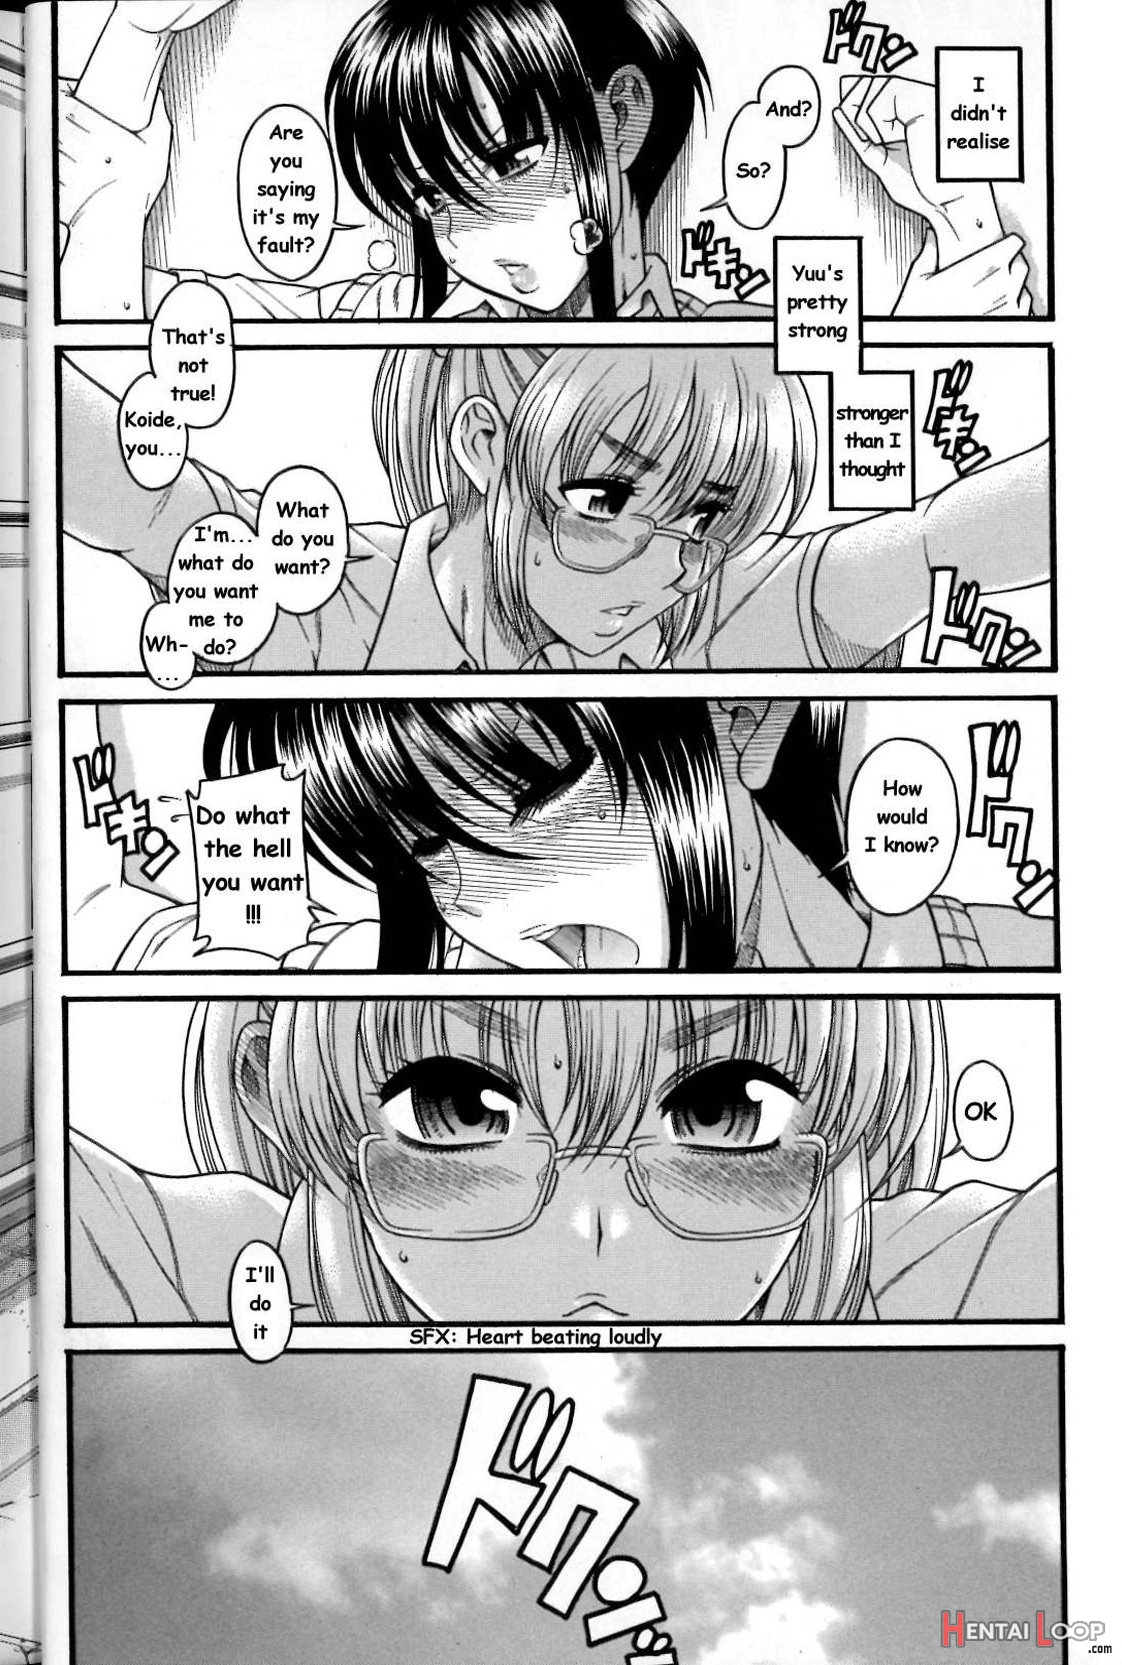 Boy Meets Girl, Girl Meets Boy 2- Single Page Version page 20